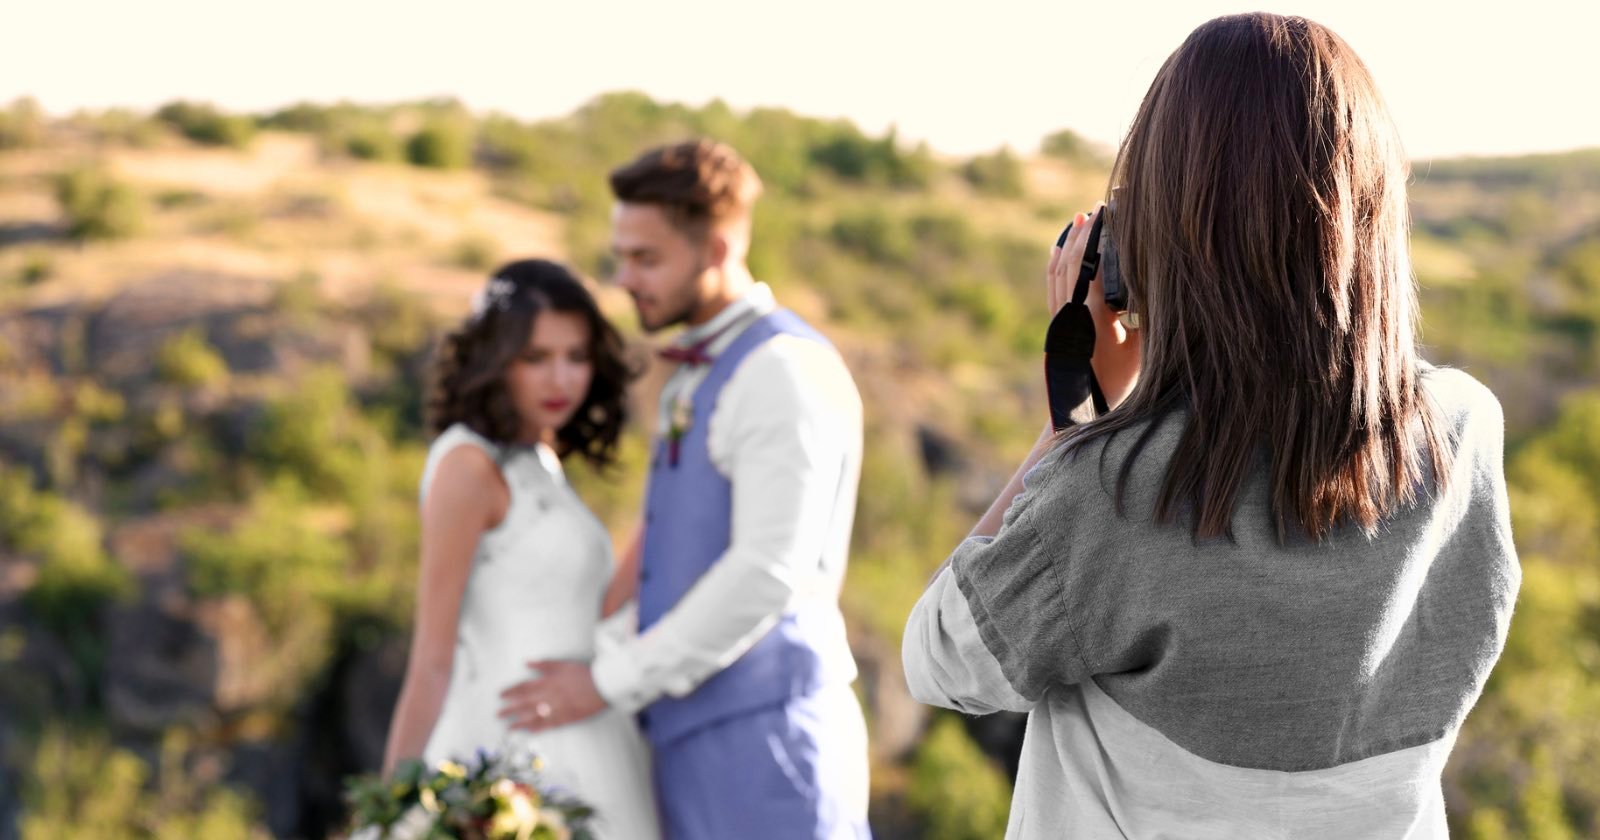 Wedding Photographer Pleads Guilty to Felony Theft After Scamming Couples